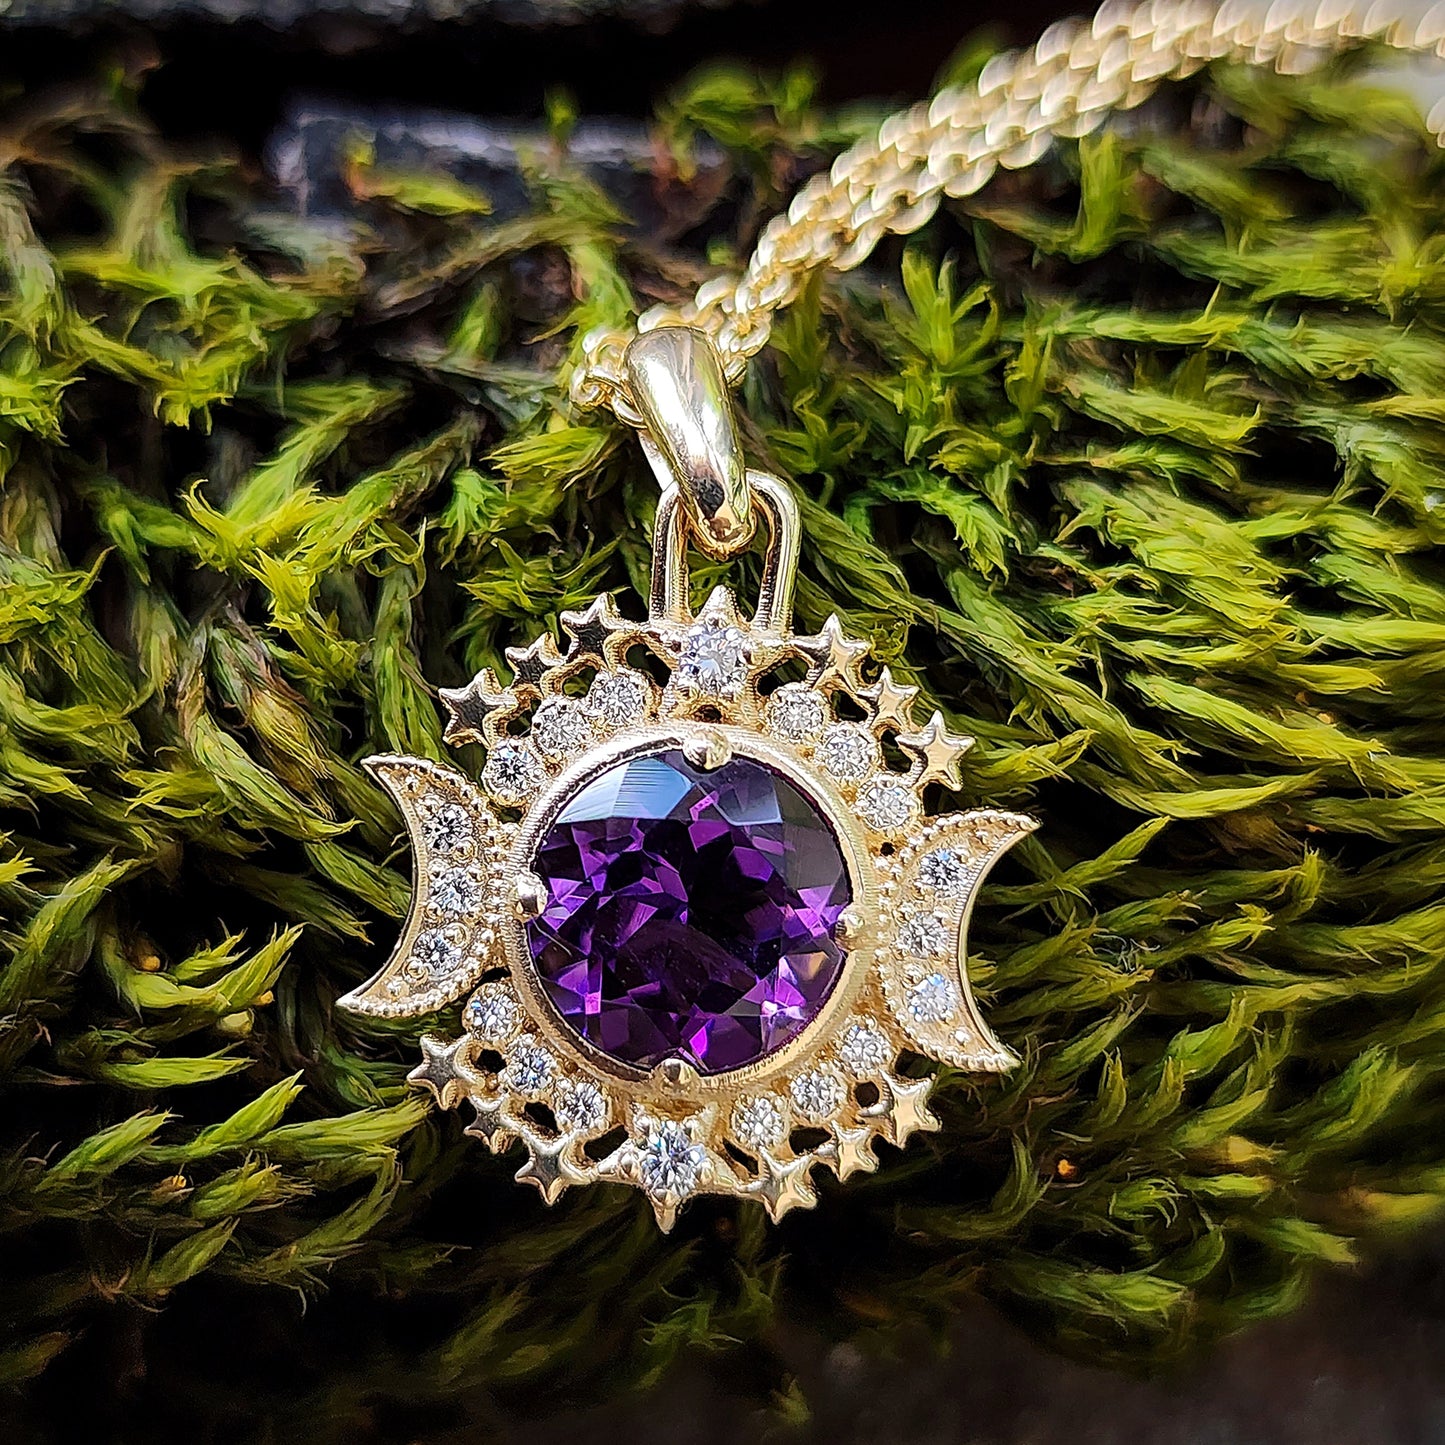 Round Amethyst Pendant with Moon & Stars Diamond Halo, Celestial Delicate Fine Jewelry 14k Gold Ethereal Handmade Necklace